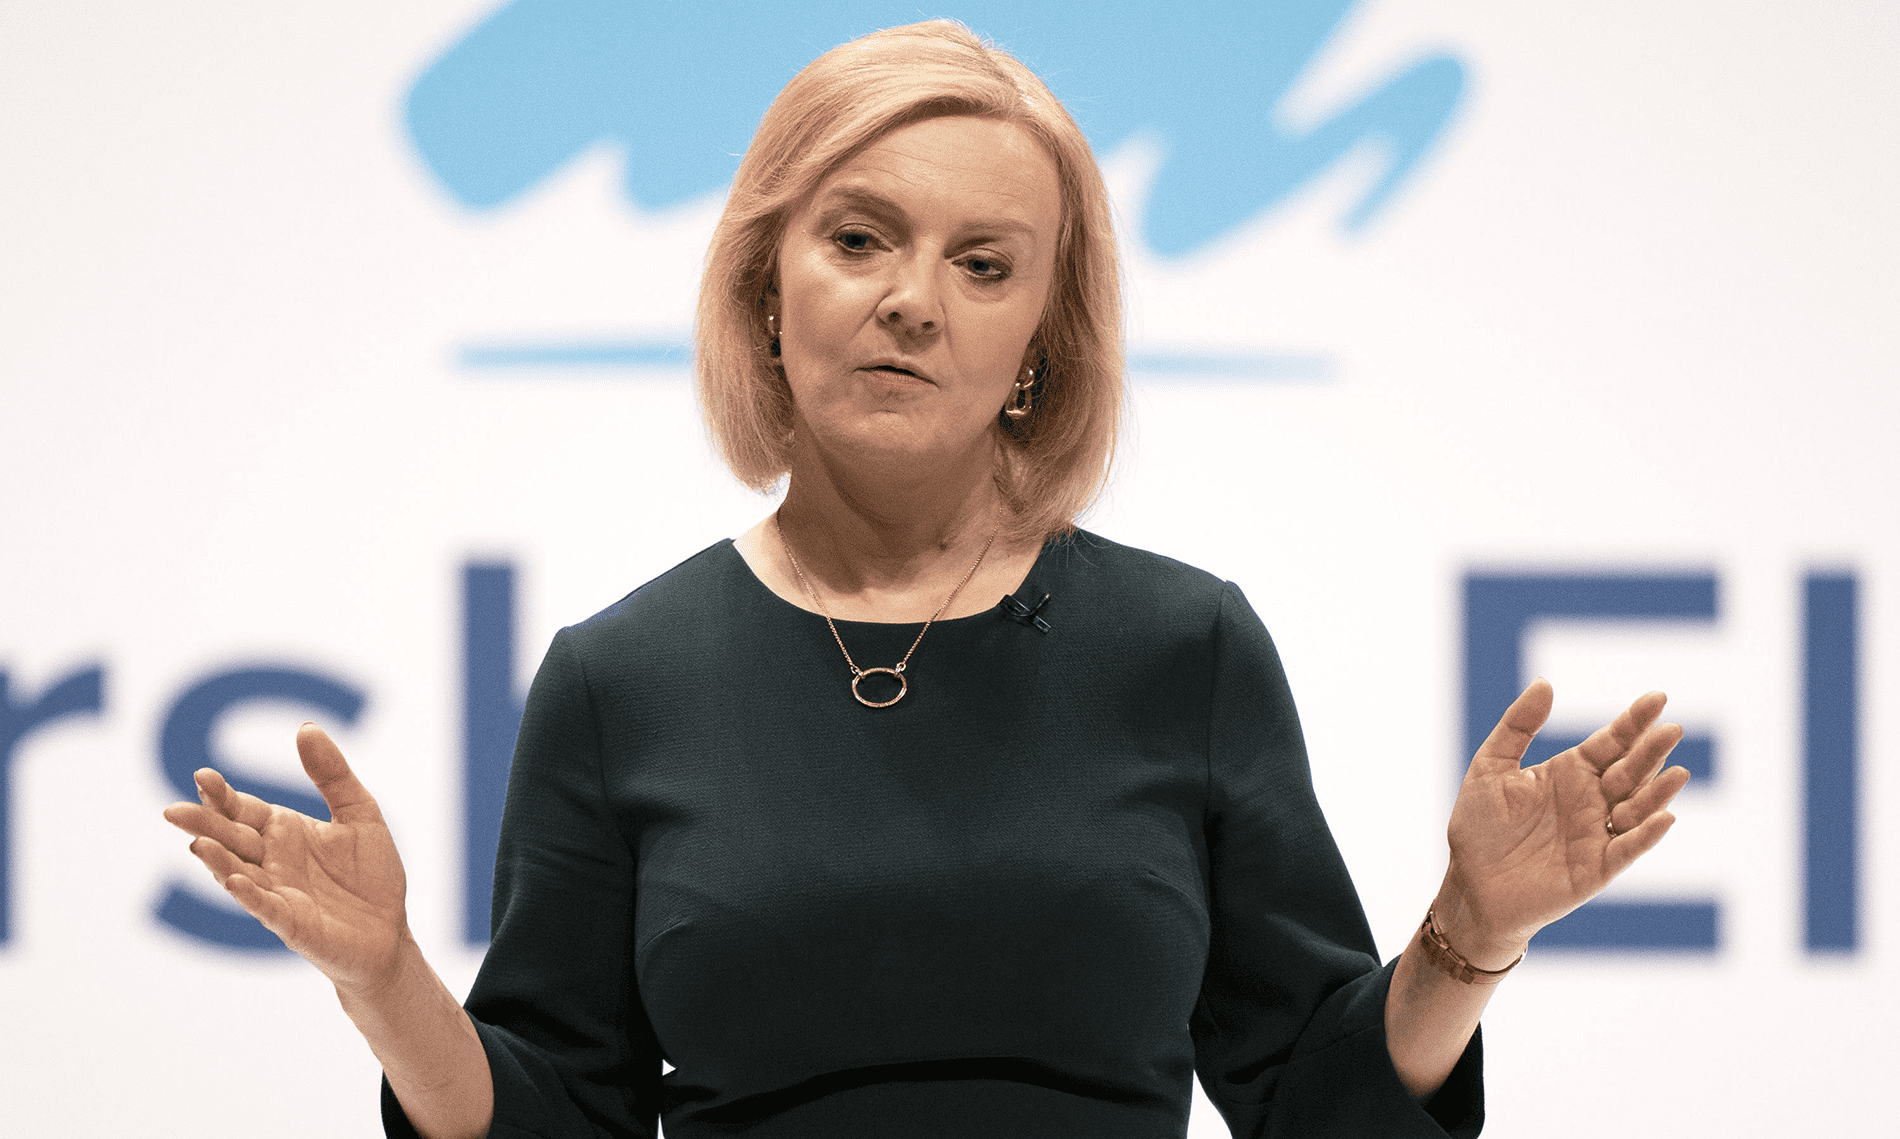 Liz Truss calls for economic union to stand up to China and everyone says the same thing